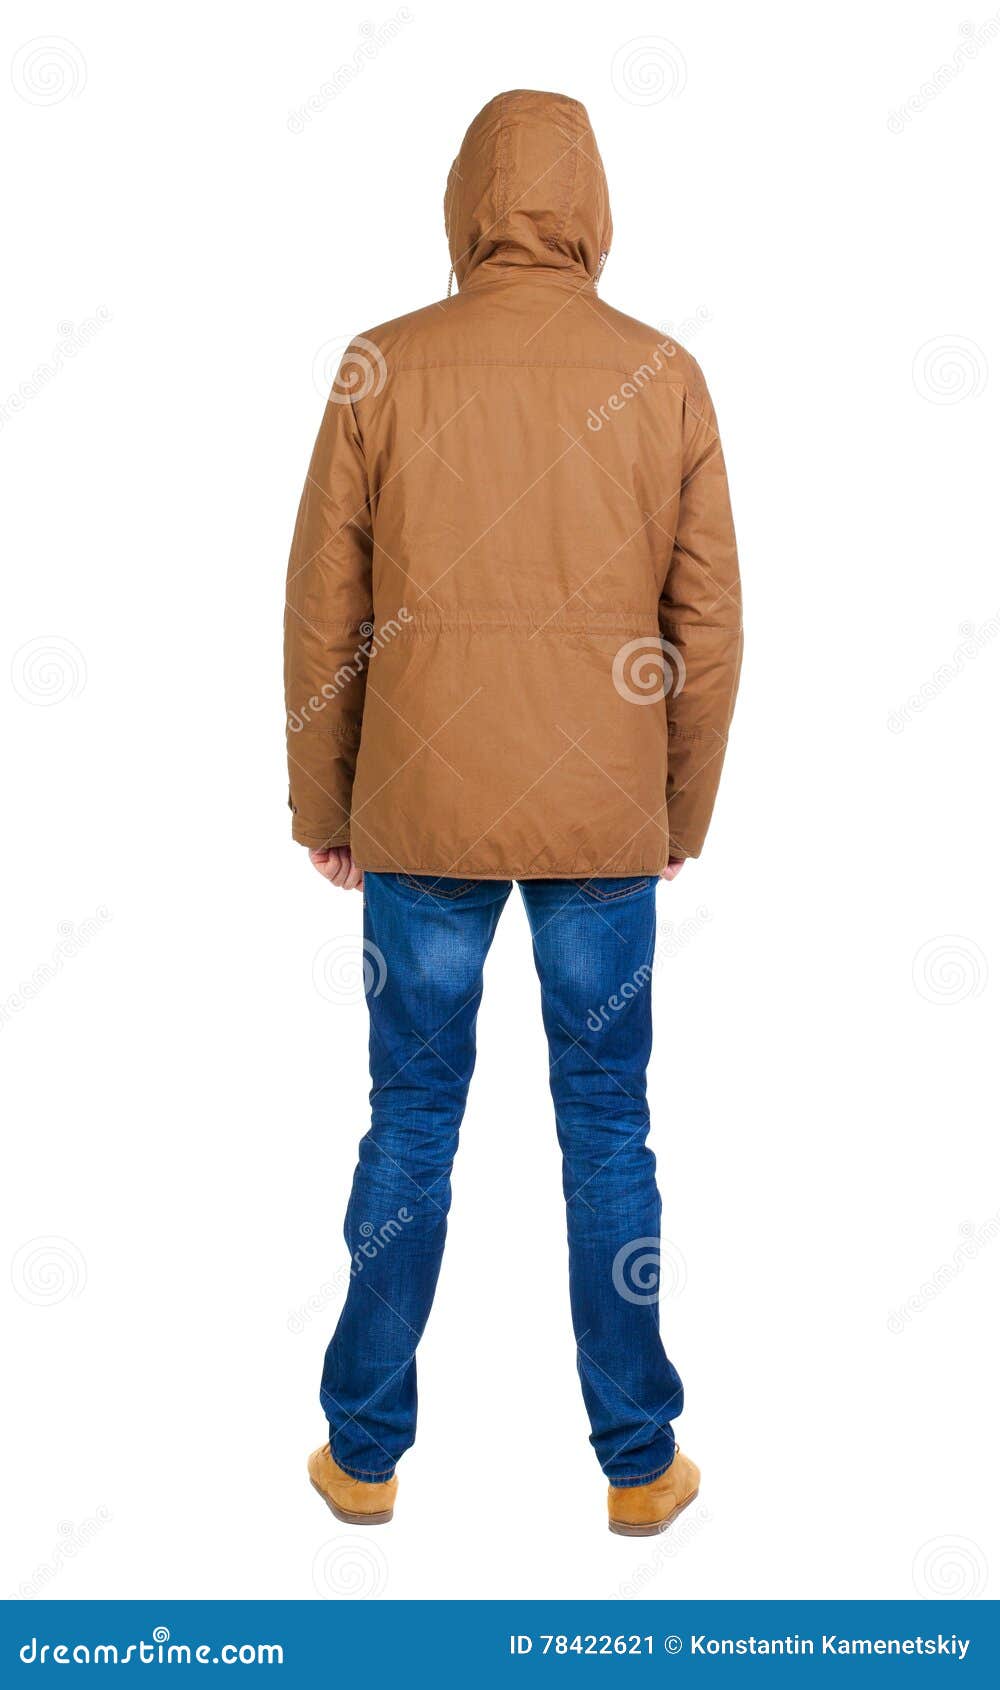 Back View of Handsome Man in Winter Parka Looking Stock Image - Image ...